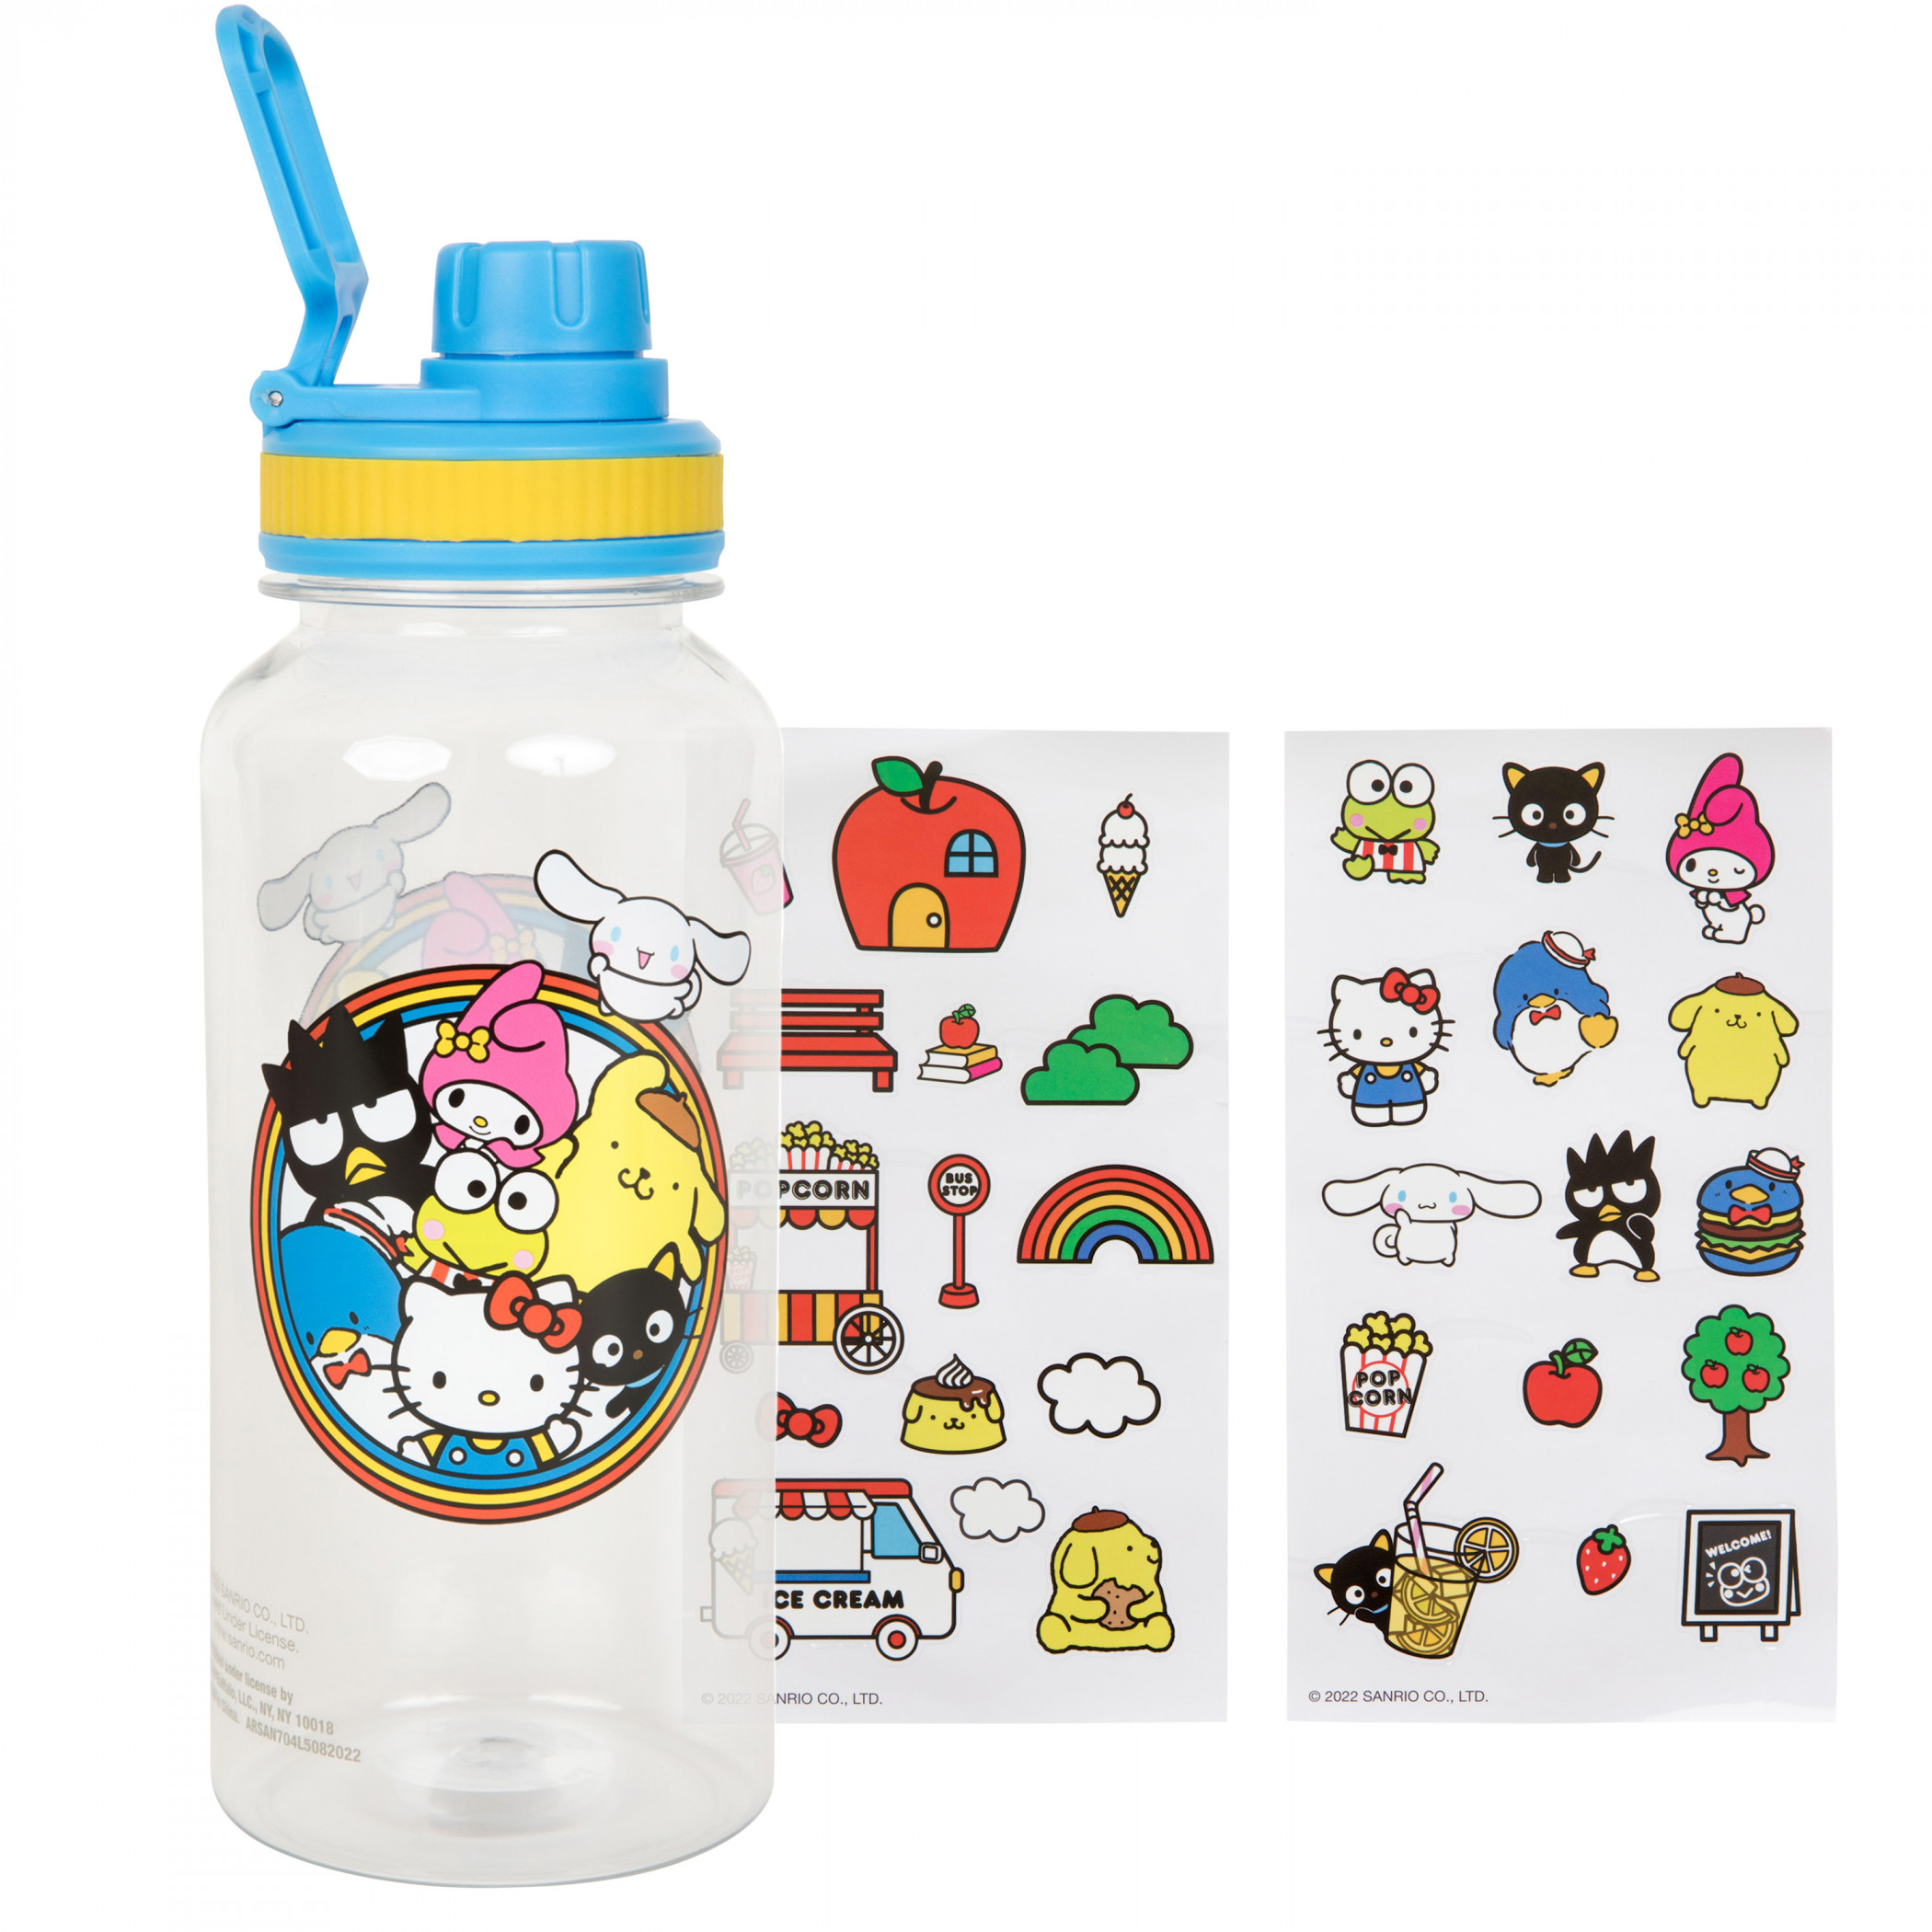 Hello Kitty and Friends Sanrio 32 oz Water Bottle with Stickers